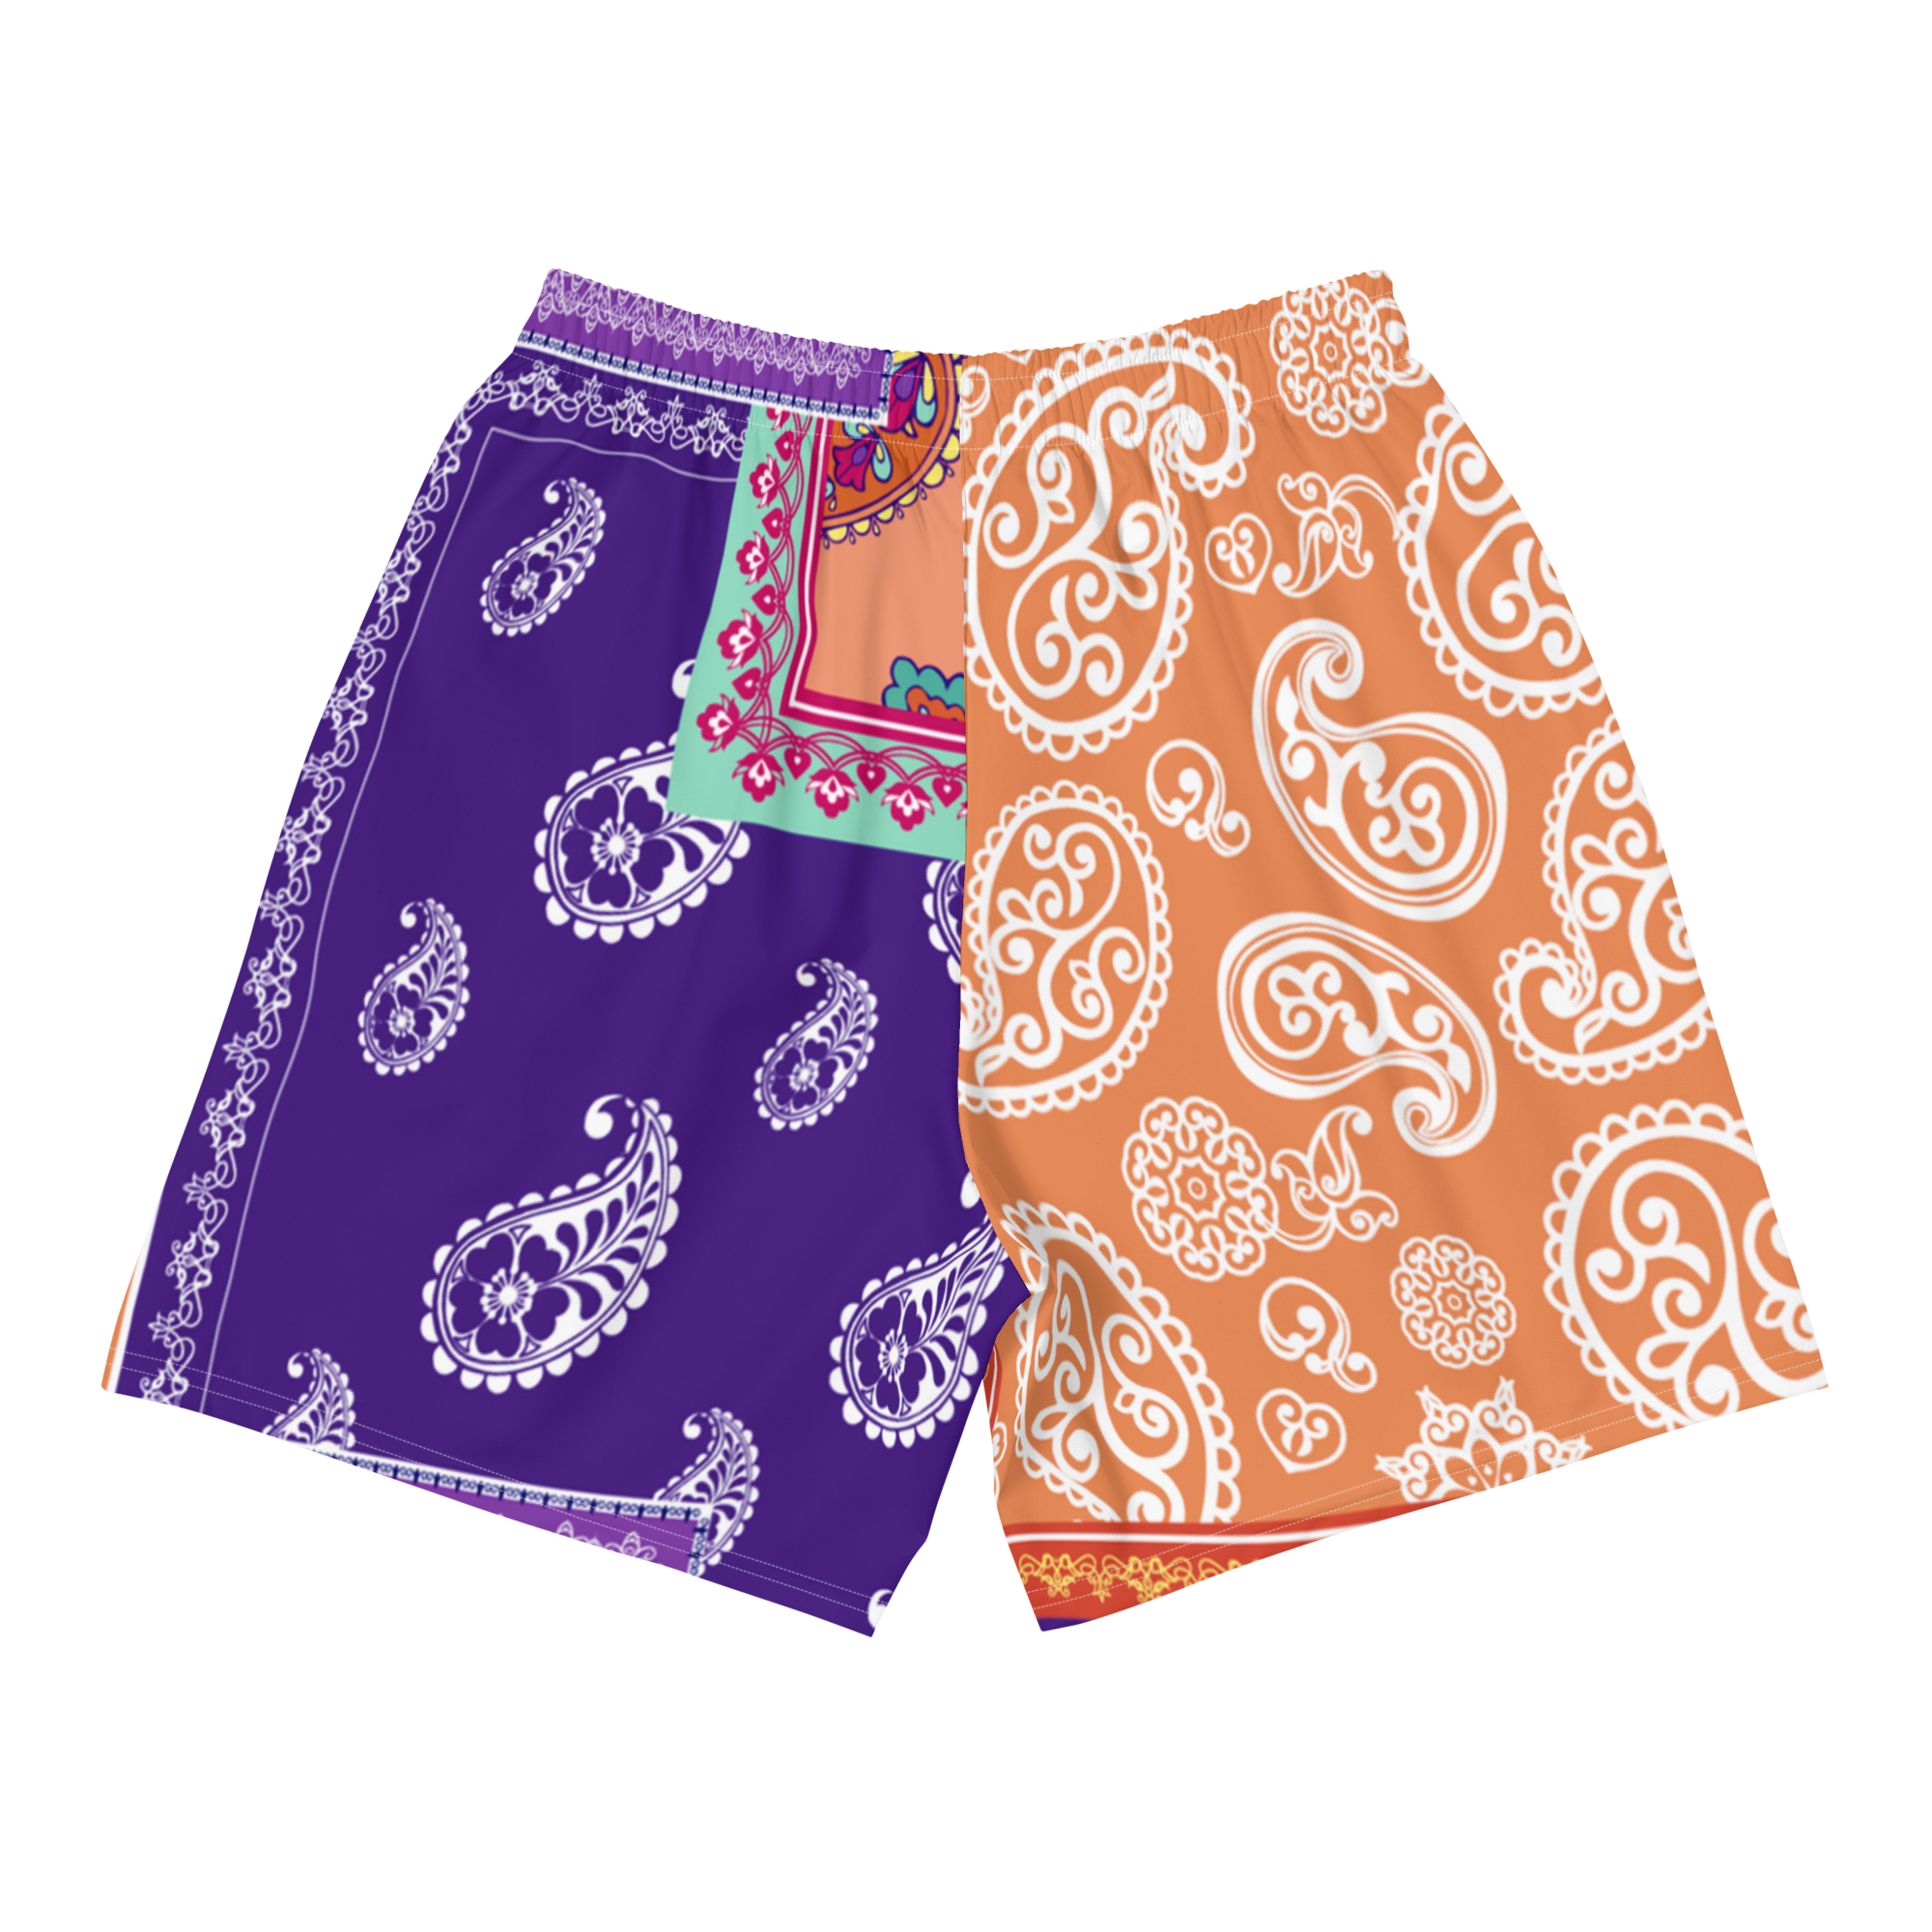 Paisley Park - Recycled Athletic Shorts